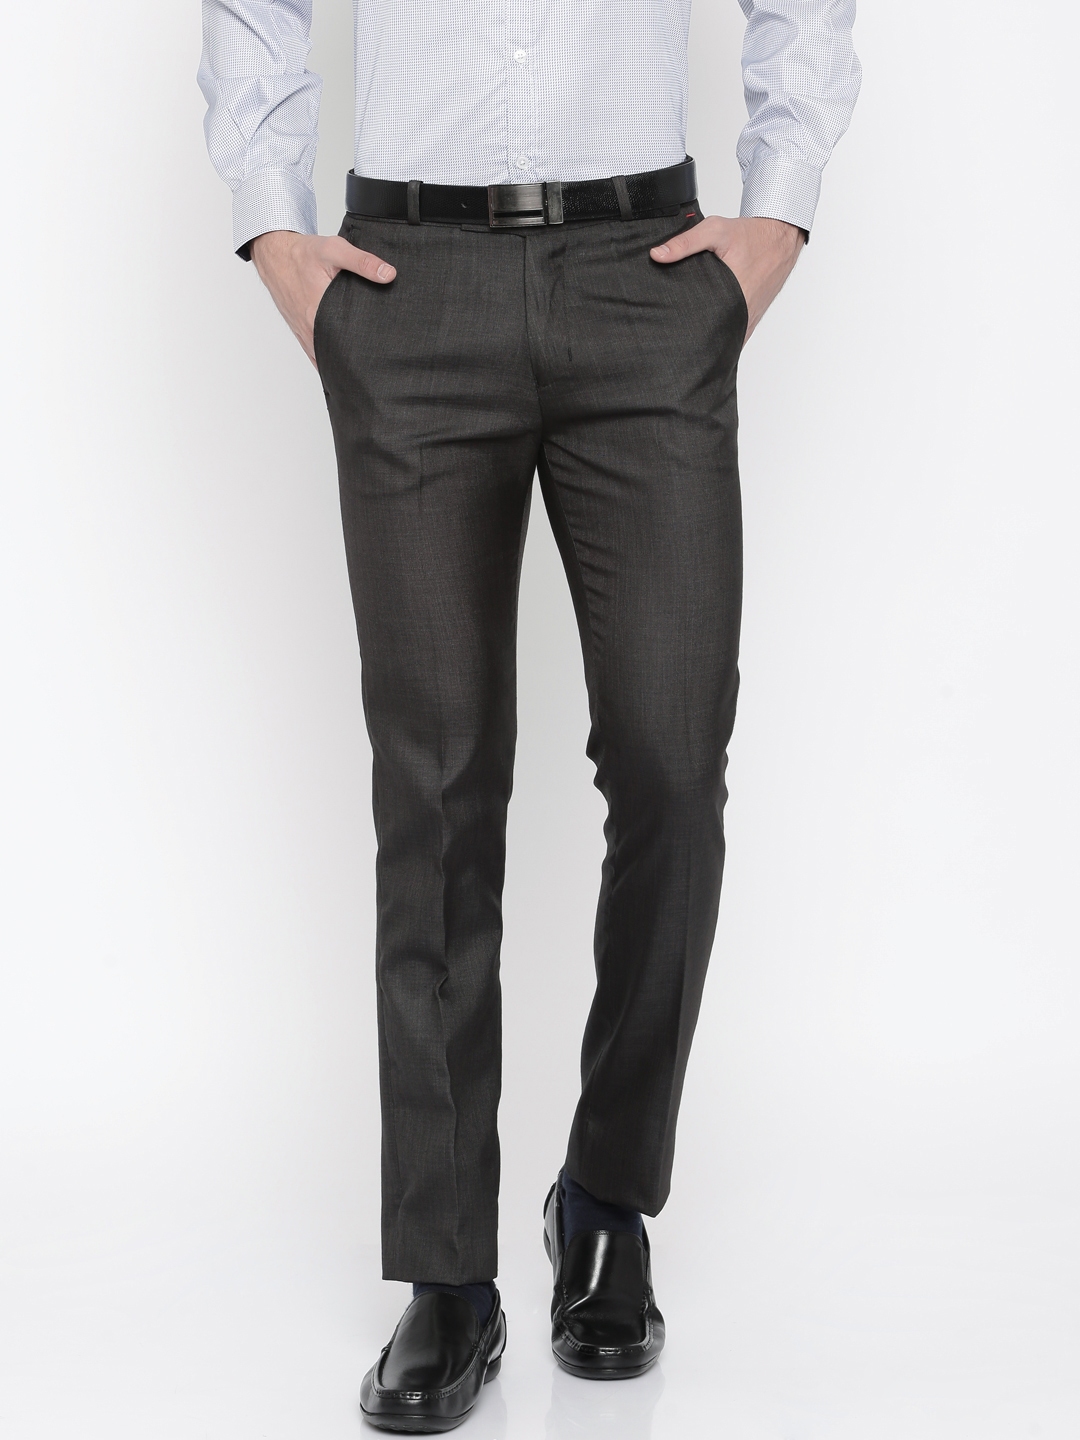 Buy PERCH Men Charcoal Grey Self Design Fit Flat Front Formal Trousers ...